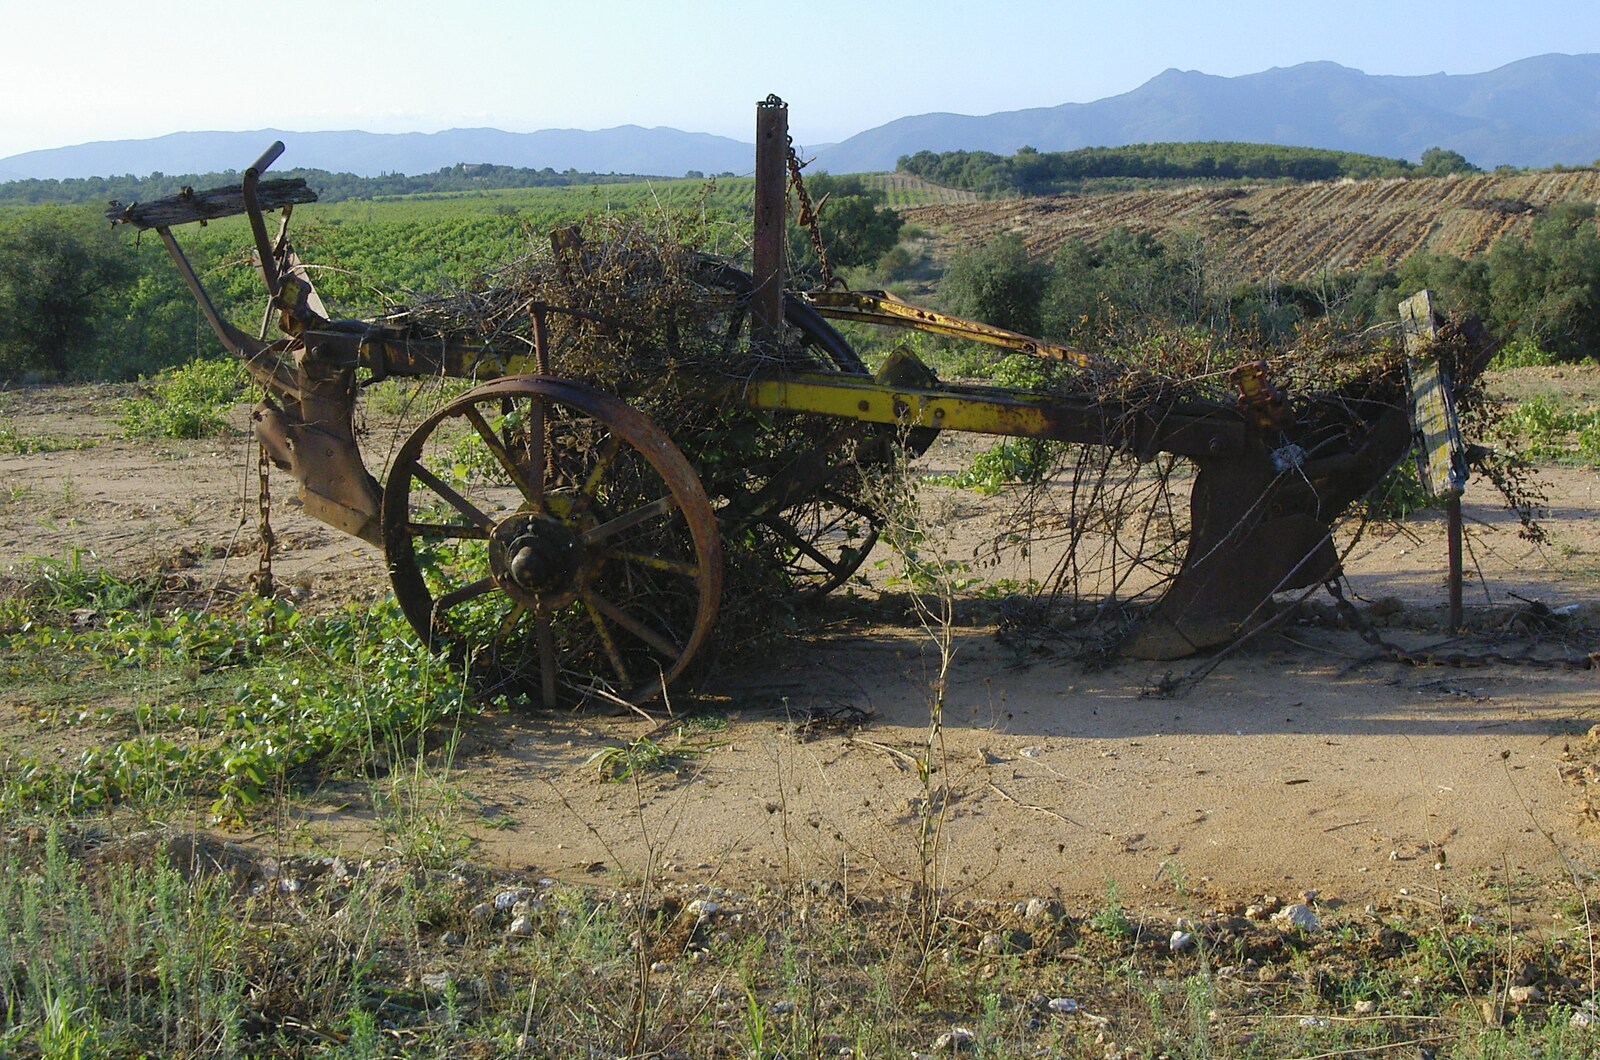 Derelict farm machinery from Grape Picking and Pressing, Roussillon, France - 19th September 2006